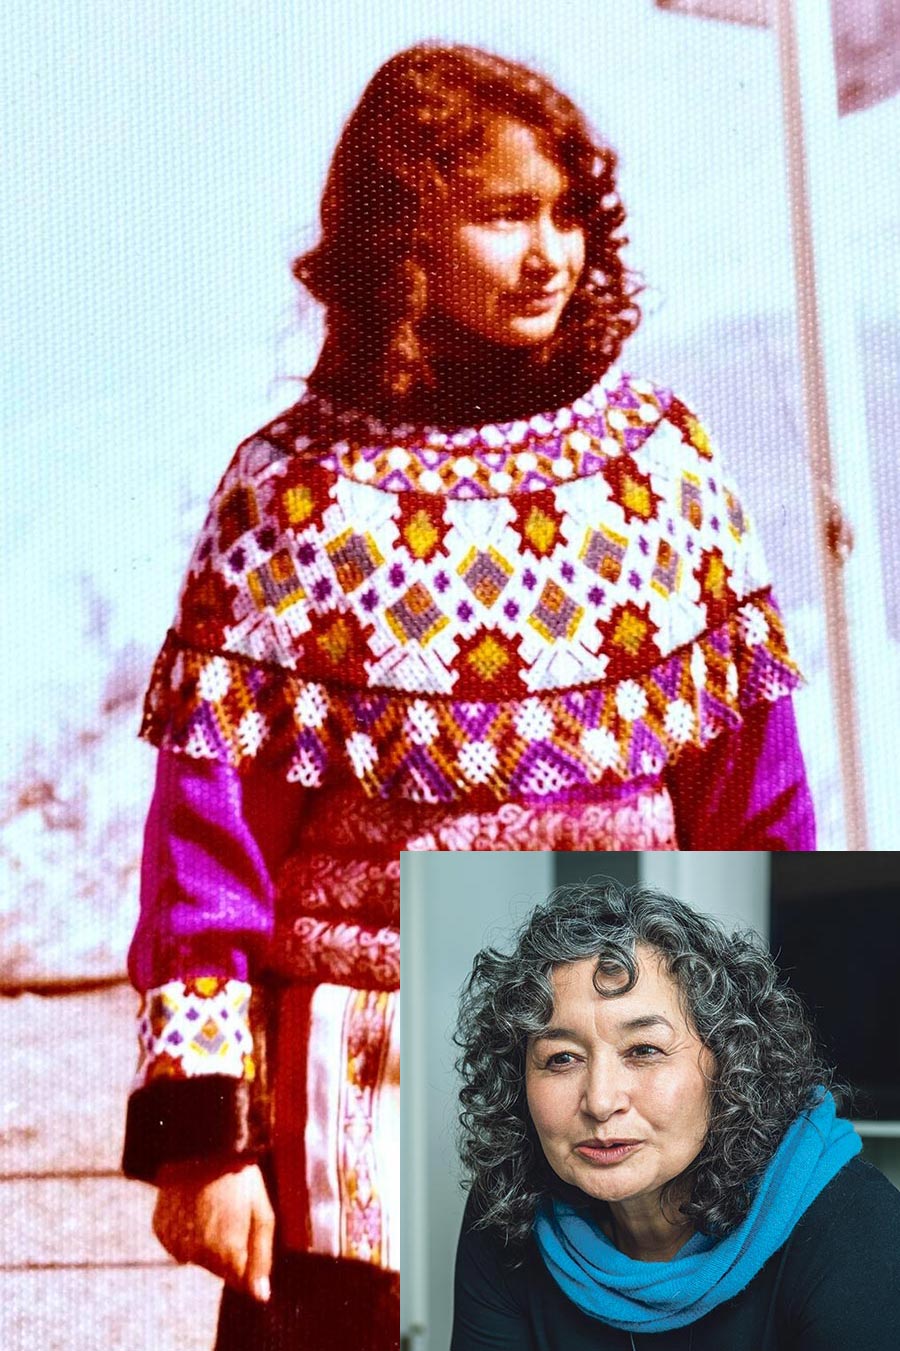 Naja Lyberth when she was 14, in traditional Greenlandic clothes, and Naja today.